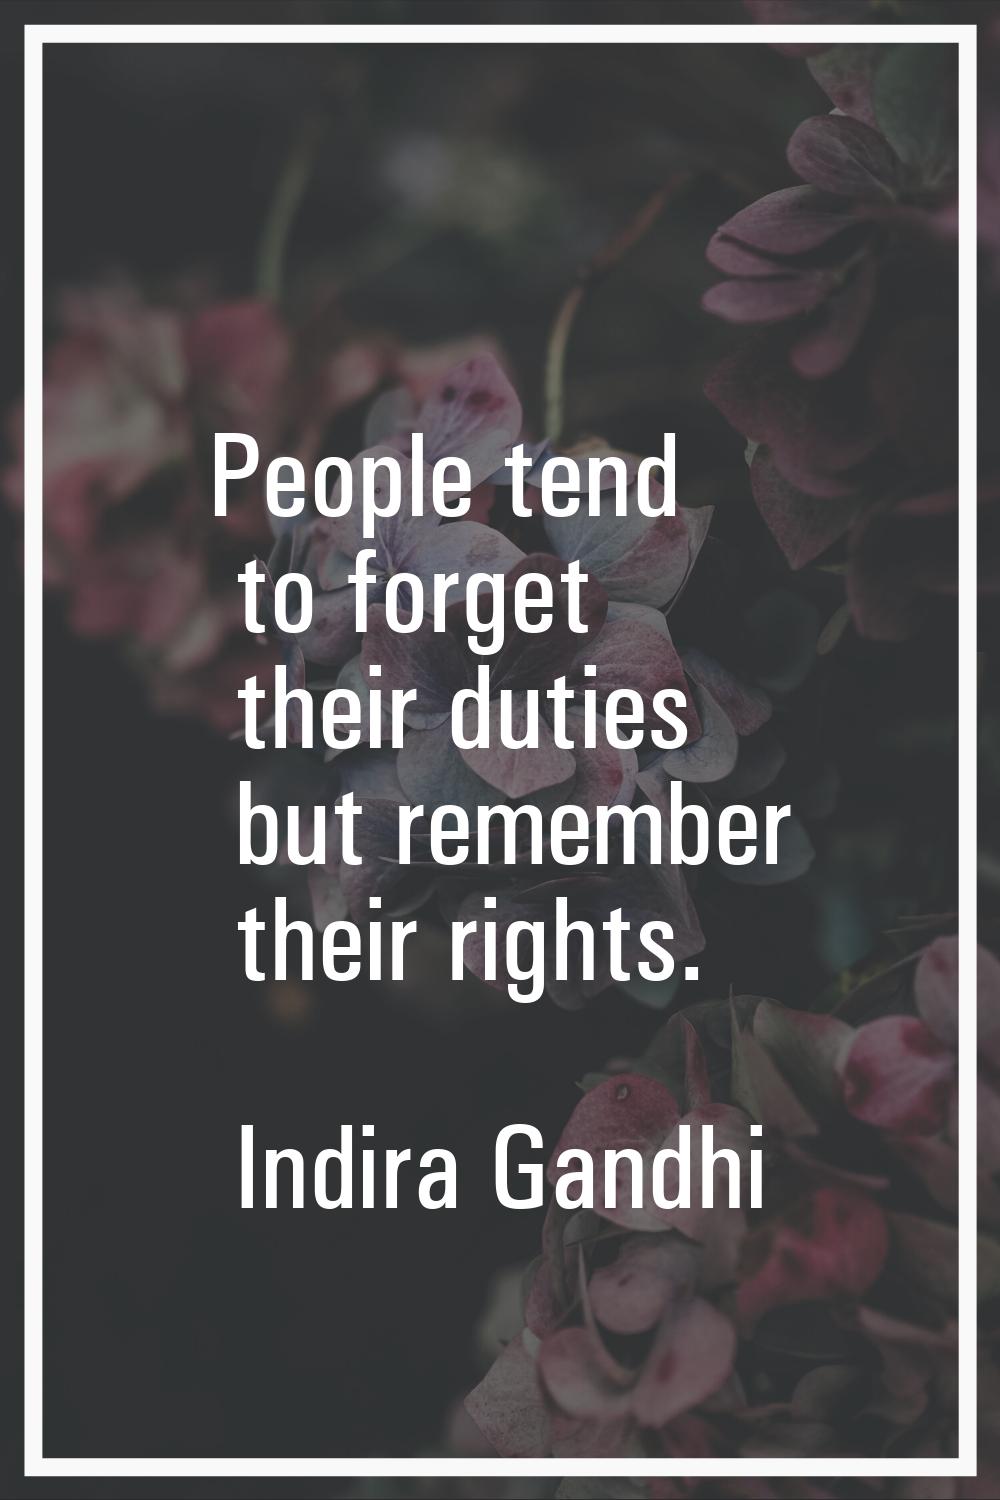 People tend to forget their duties but remember their rights.